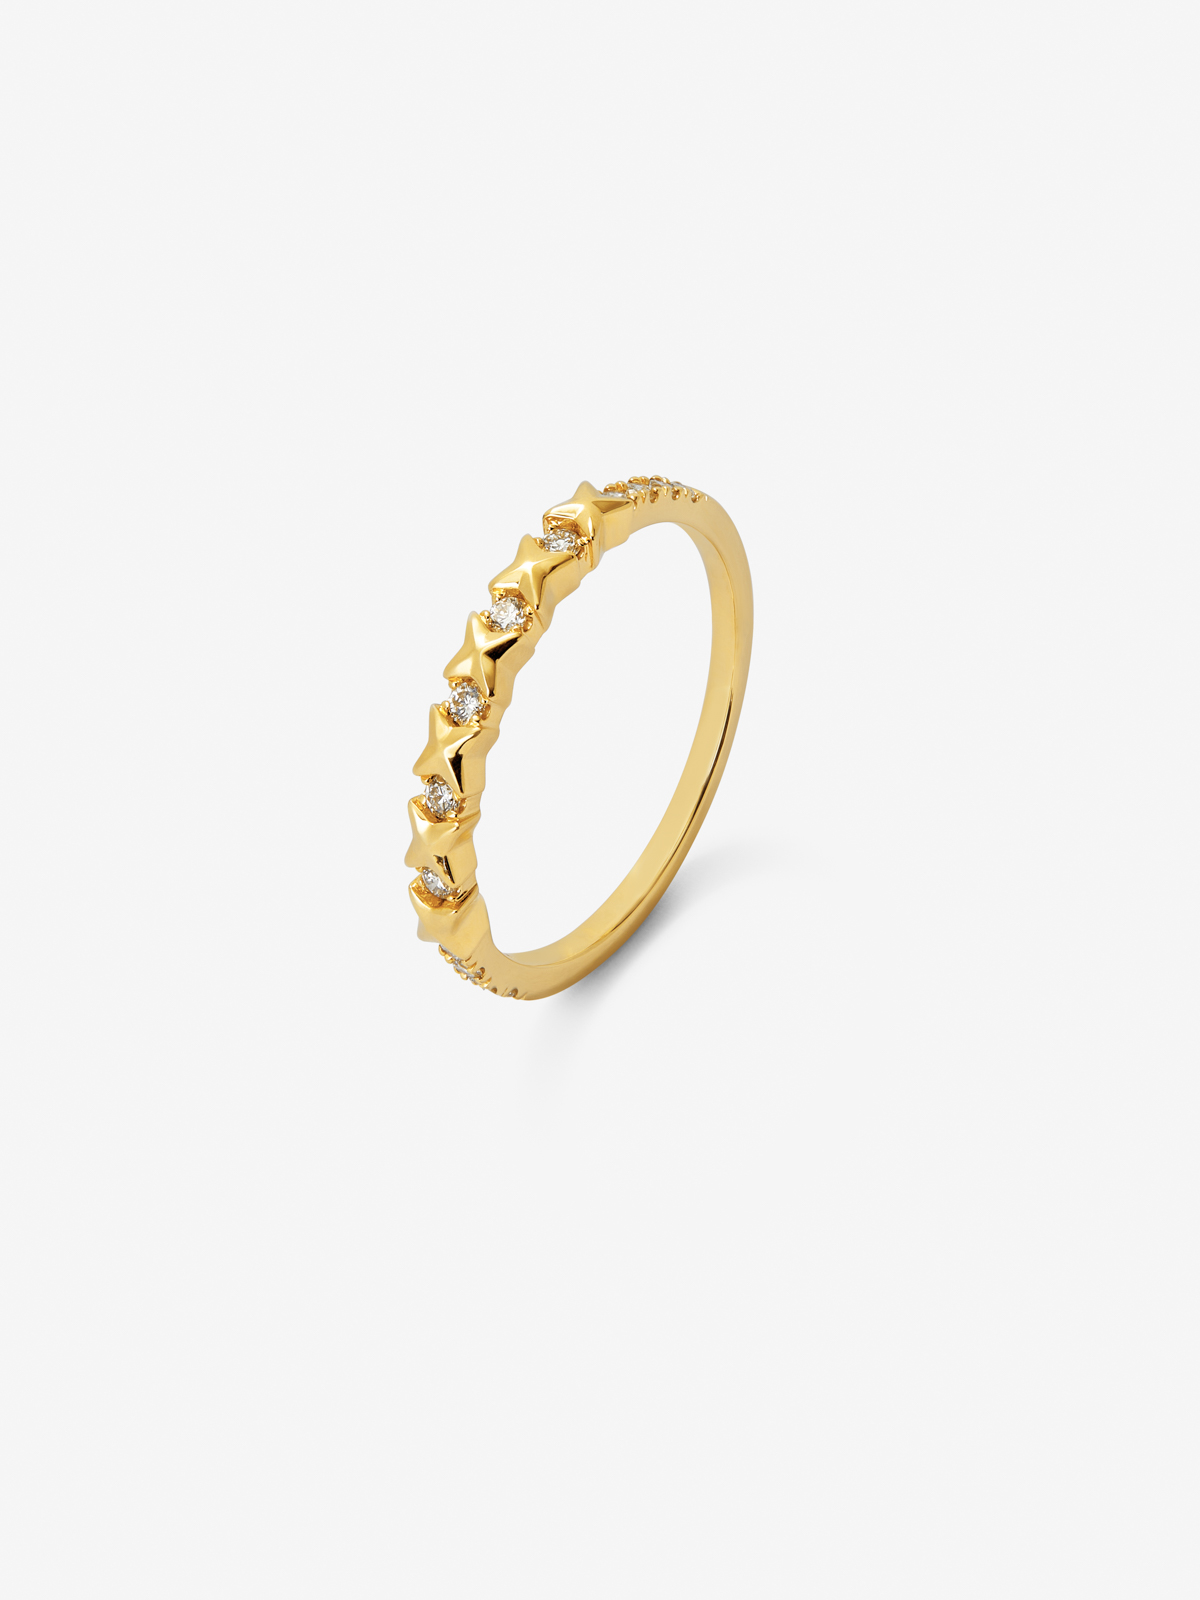 18K yellow gold ring with 13 brilliant-cut diamonds with a total of 0.16 cts